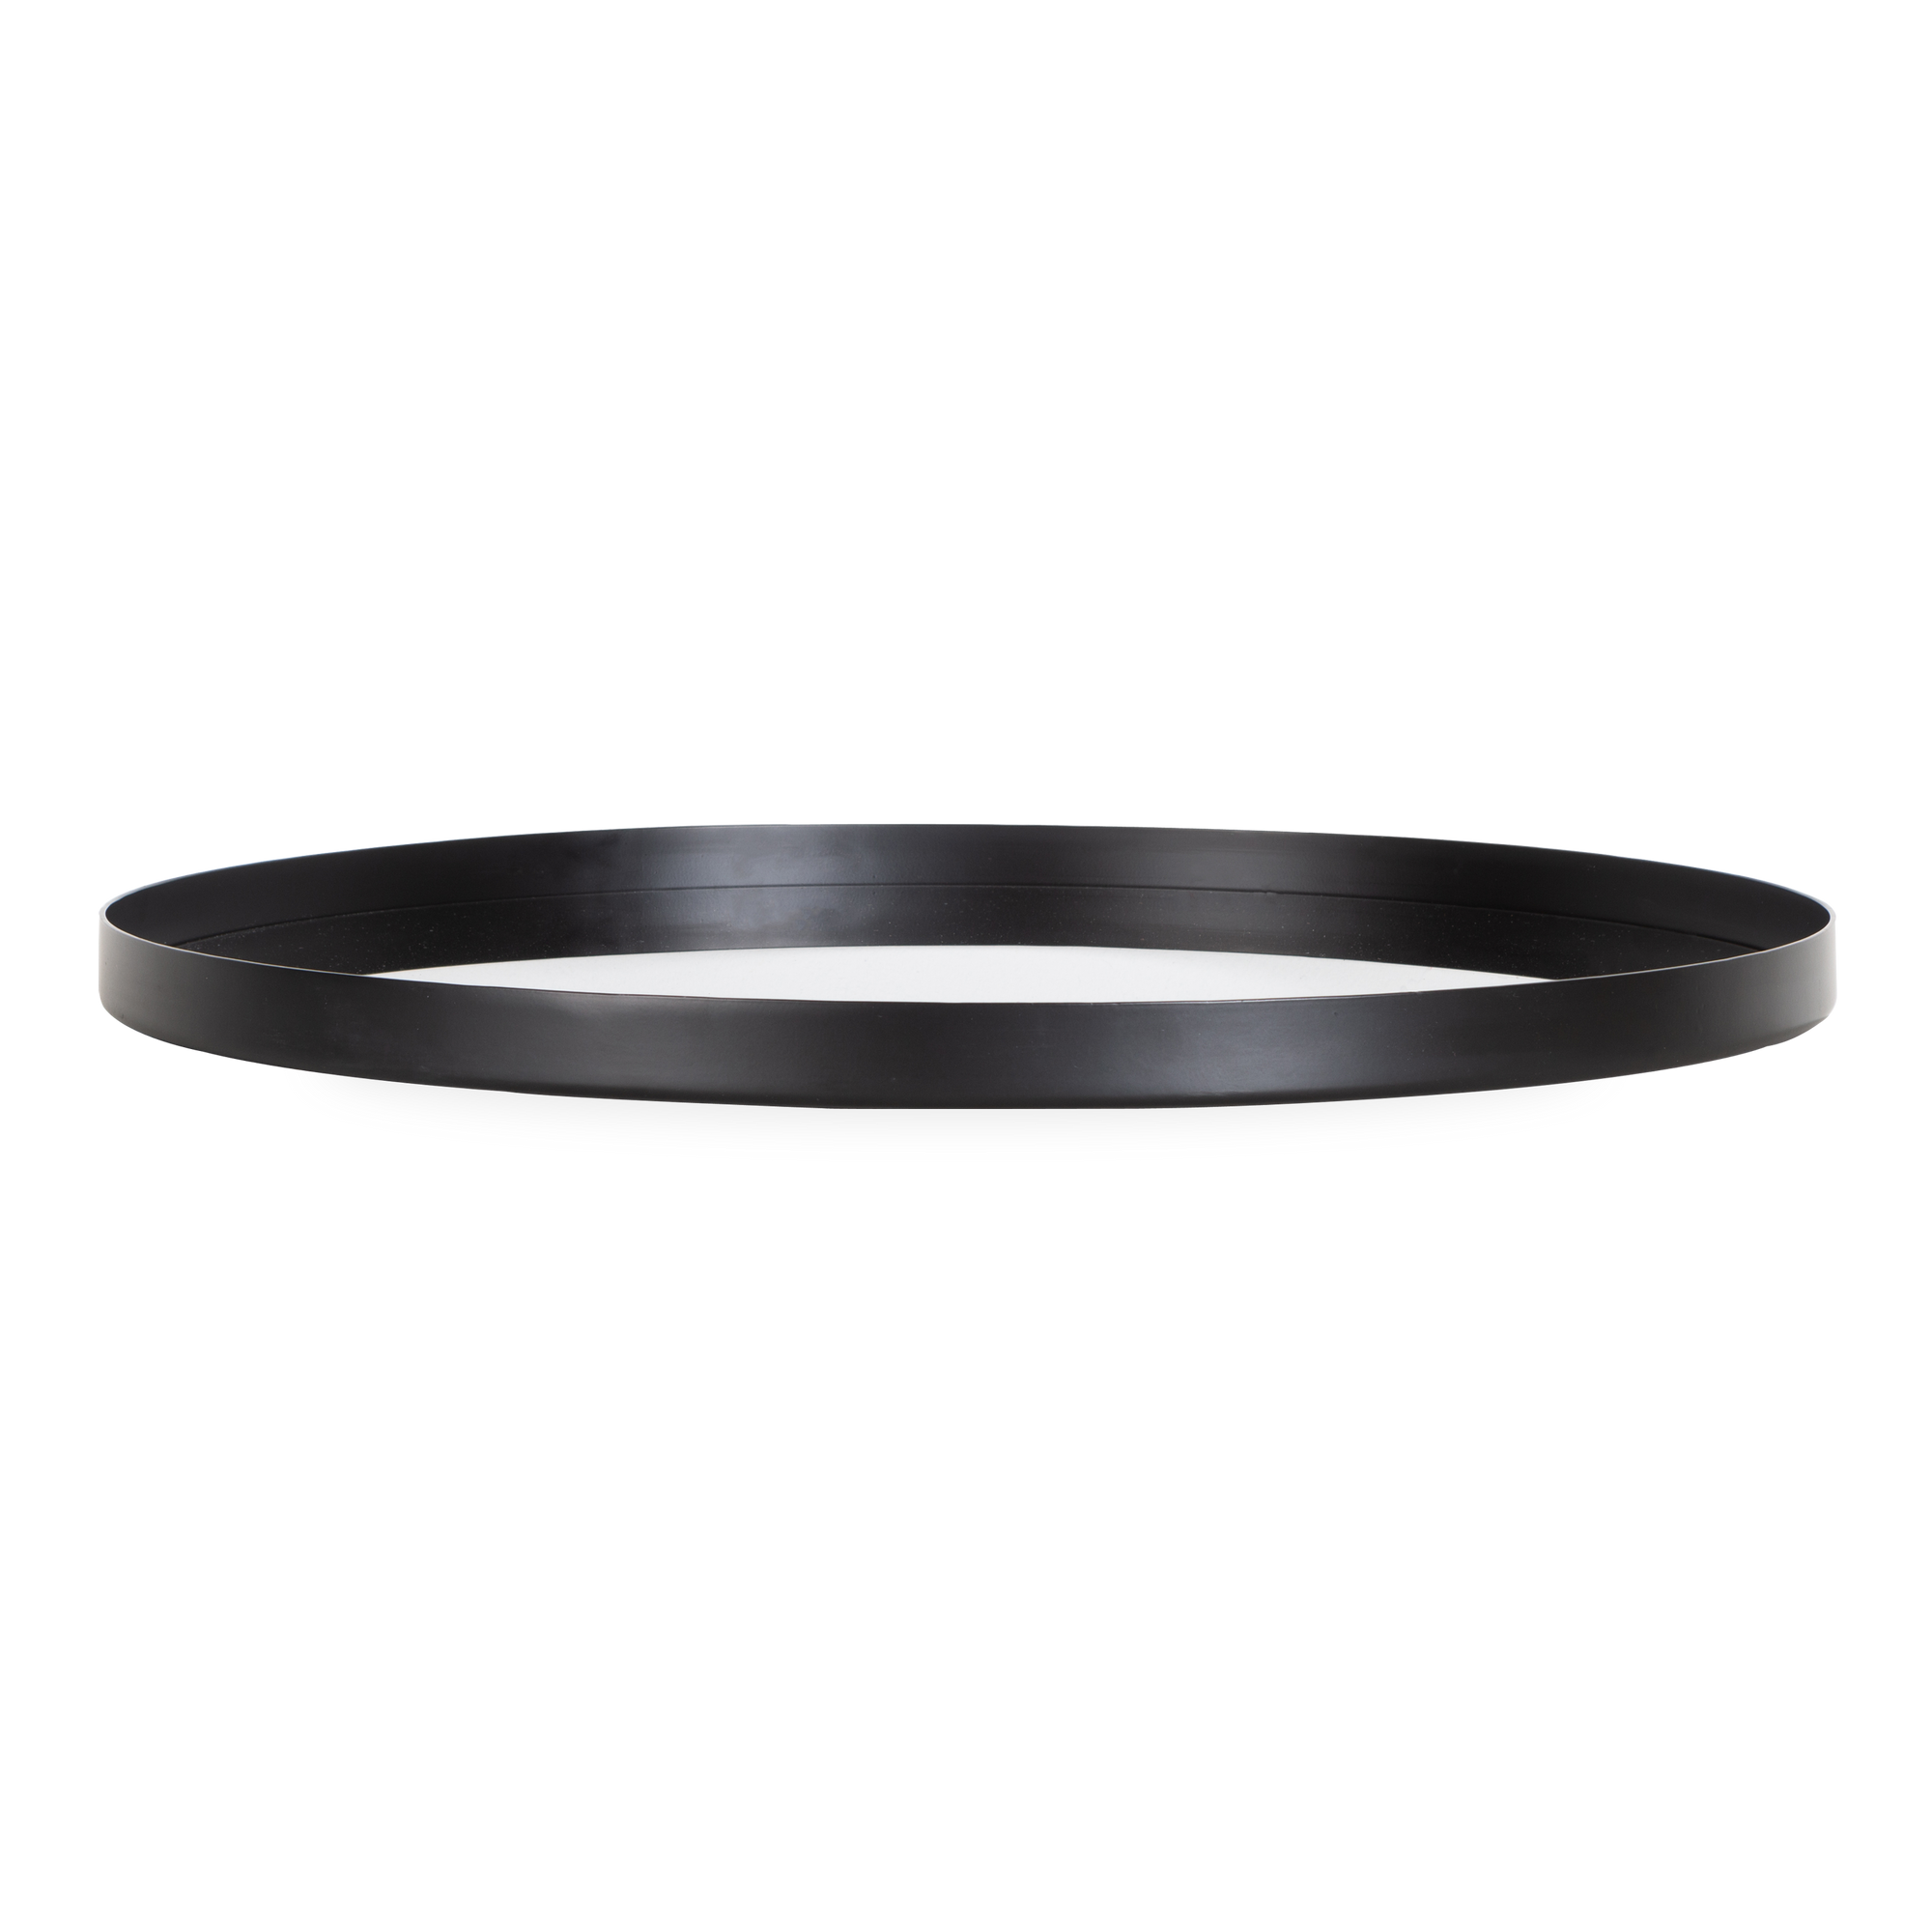 Characterized by its confident presence and its luxurious build quality, the Reflect Round Tray is defined by its clean, sharp lines and its elevation of simple forms.